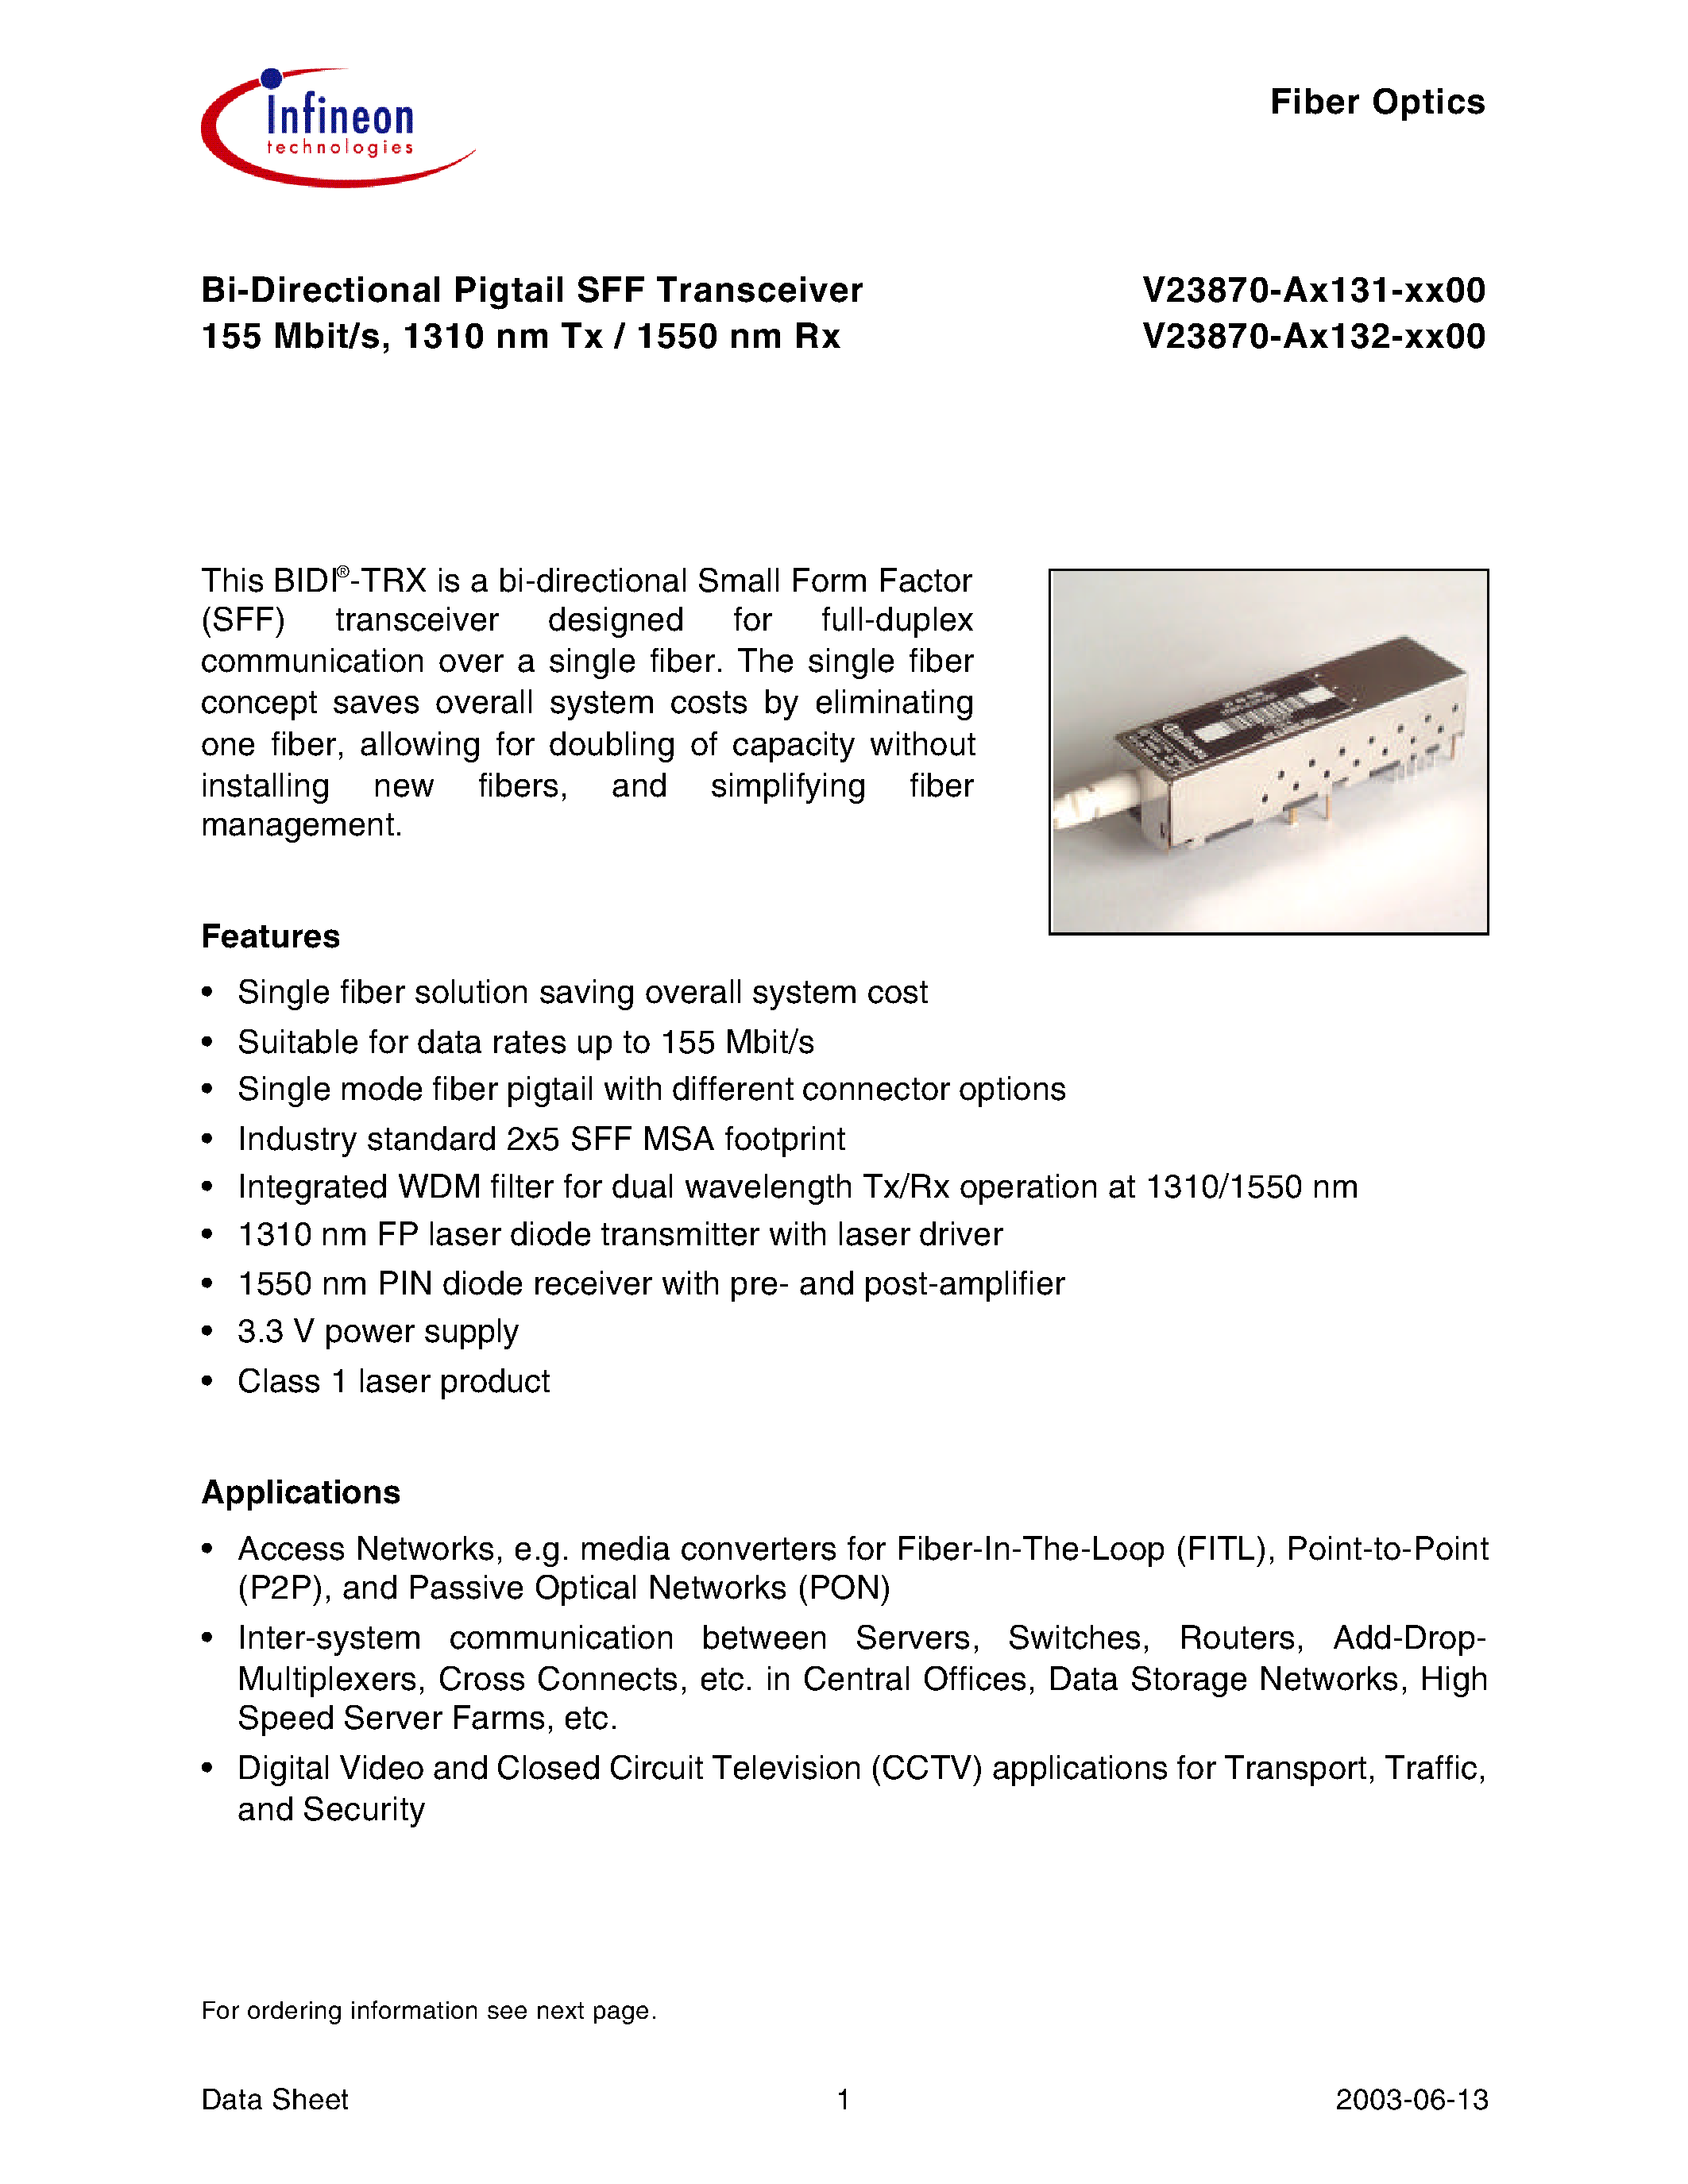 Datasheet V23870-A3132-H600 - Bi-Directional Pigtail SFF Transceiver 155 Mbit/s/ 1310 nm Tx / 1550 nm Rx page 1